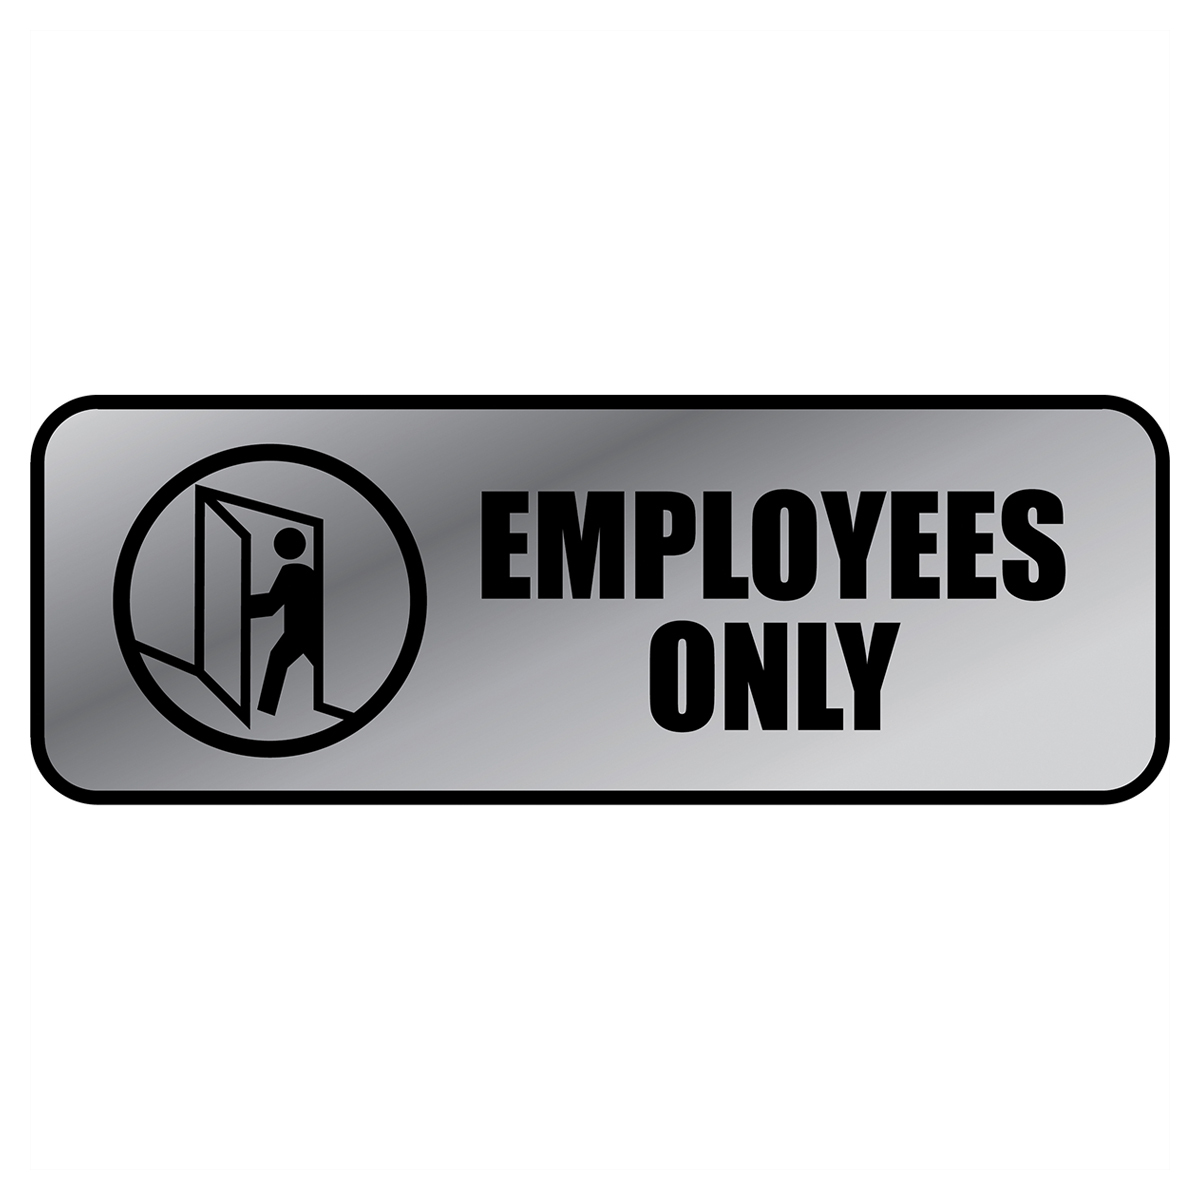 EMPLOYEES ONLY - Metal Sign - 098206